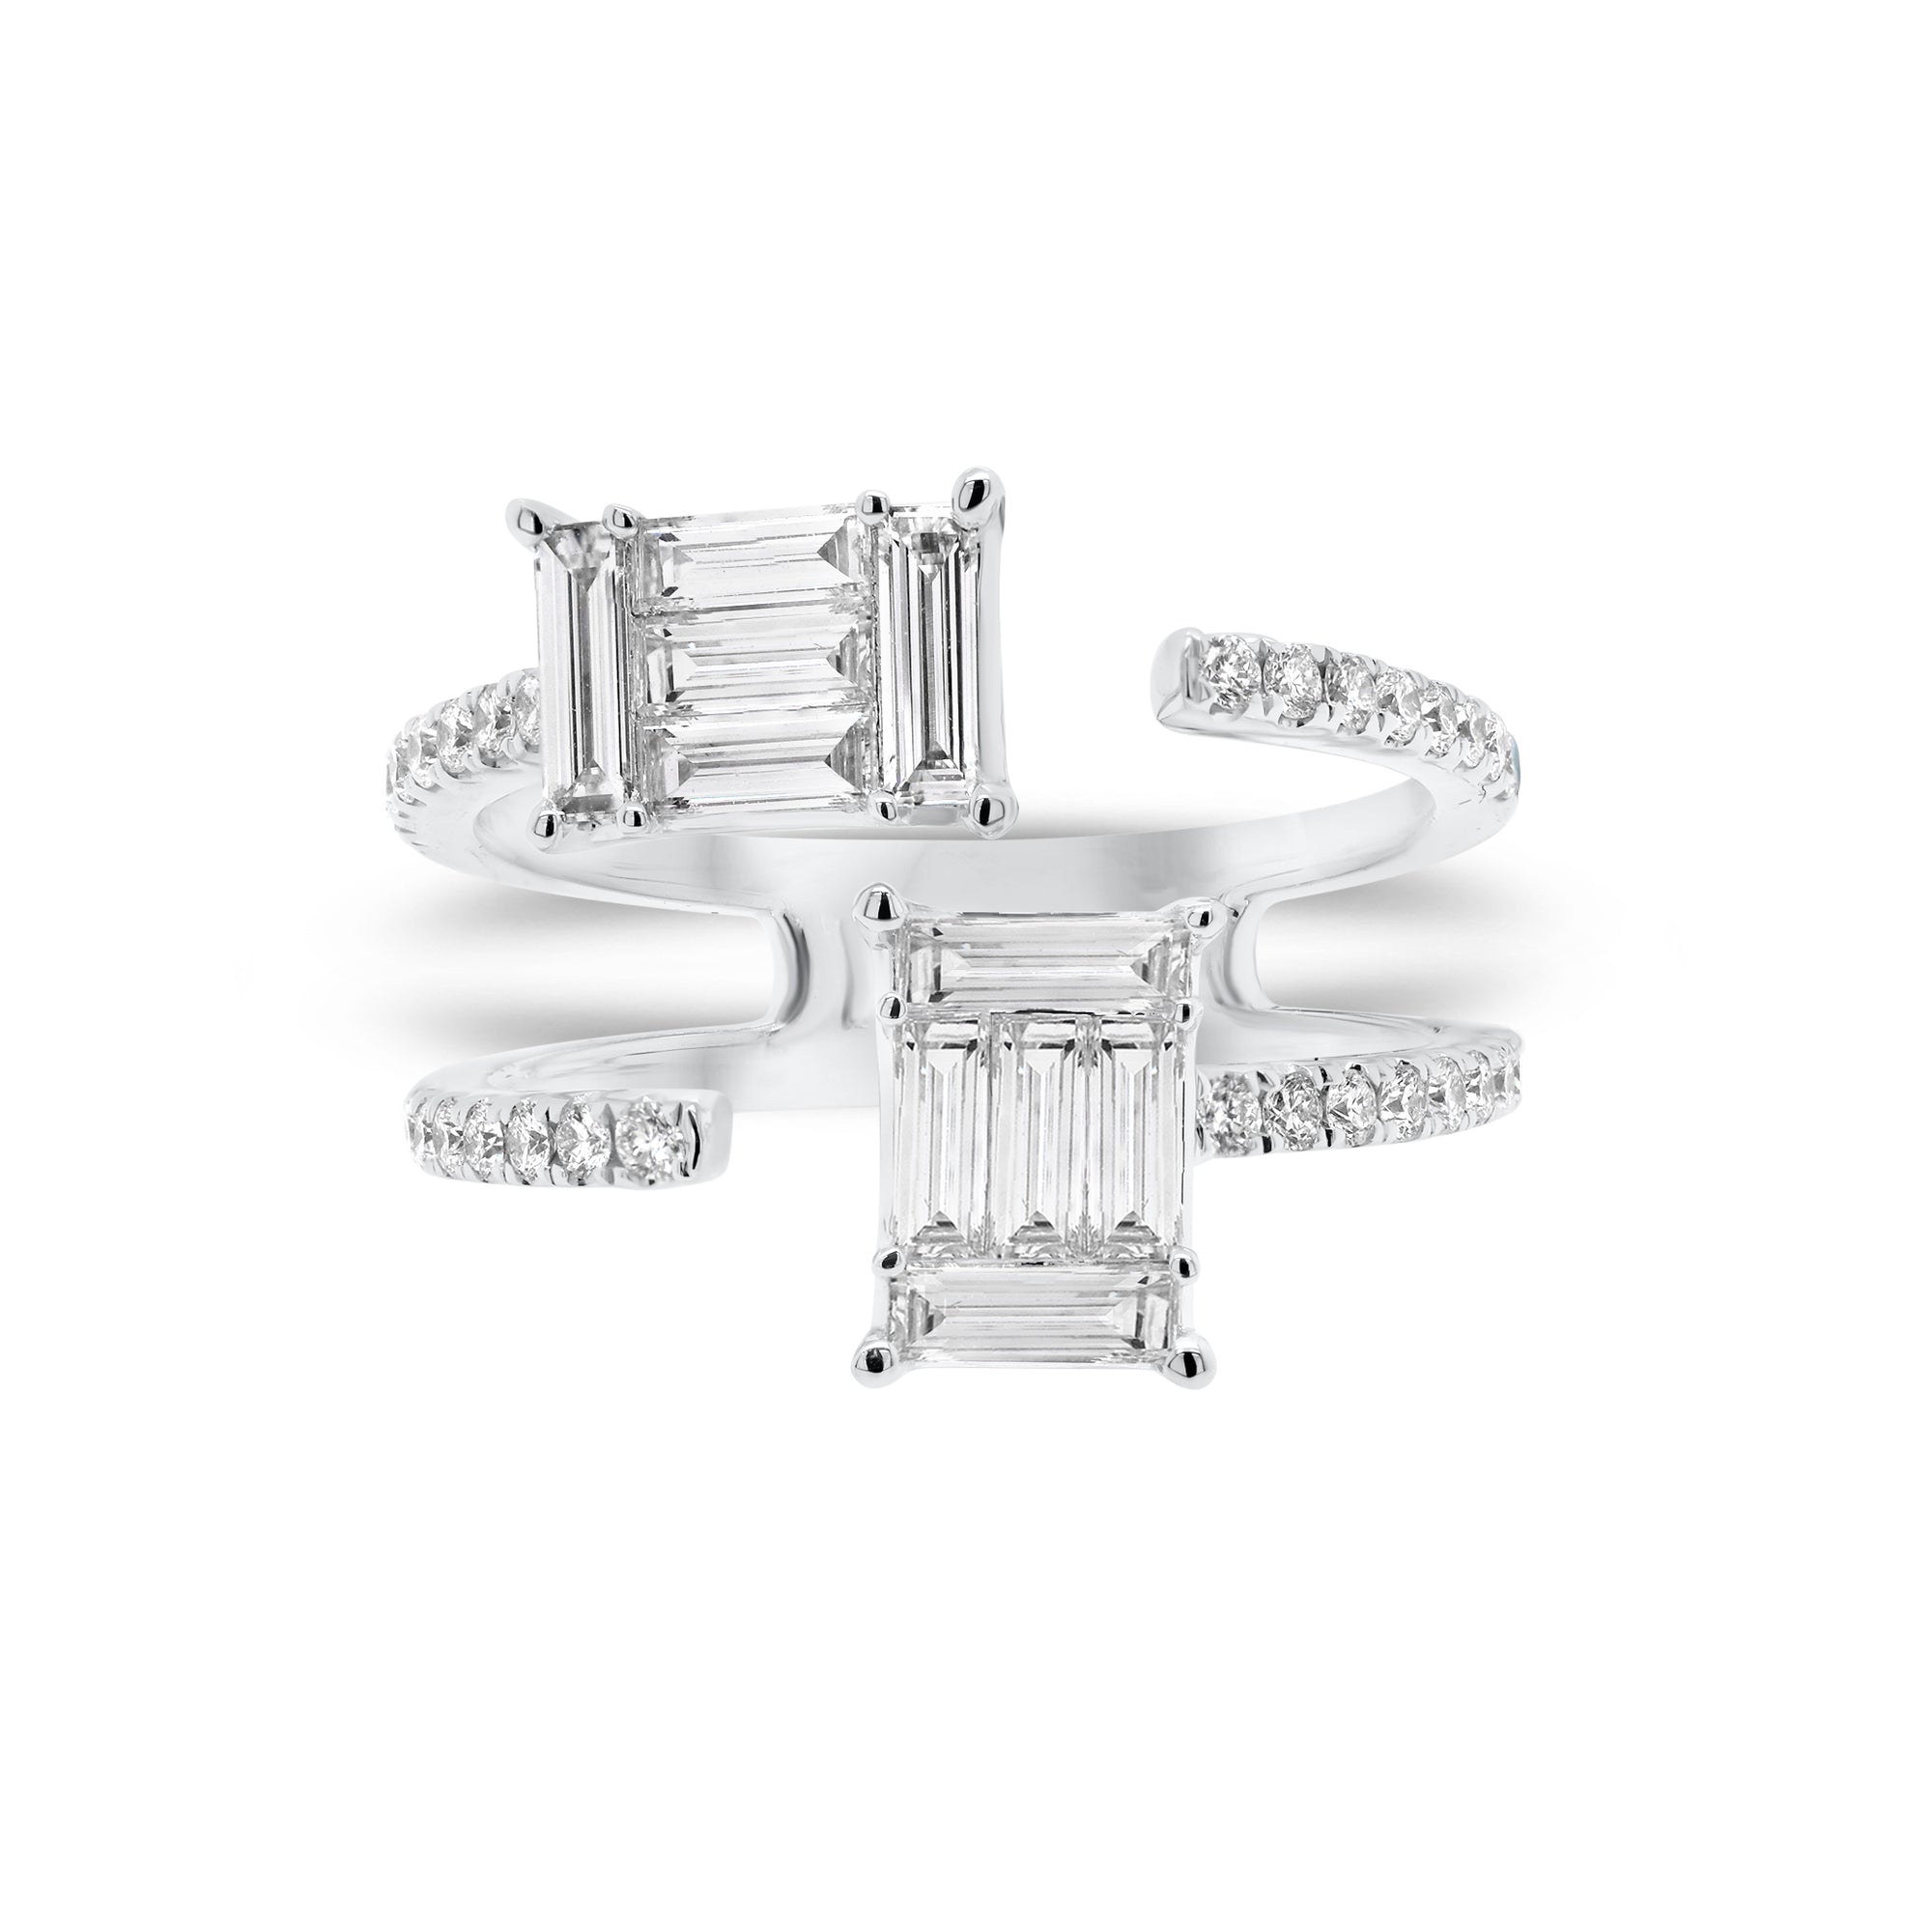 Diamond Baguette Double Claw Ring - 18K white gold weighing 4.59 grams  - 10 slim baguettes totaling 0.80 carats  - 33 round diamonds totaling 0.32 carats